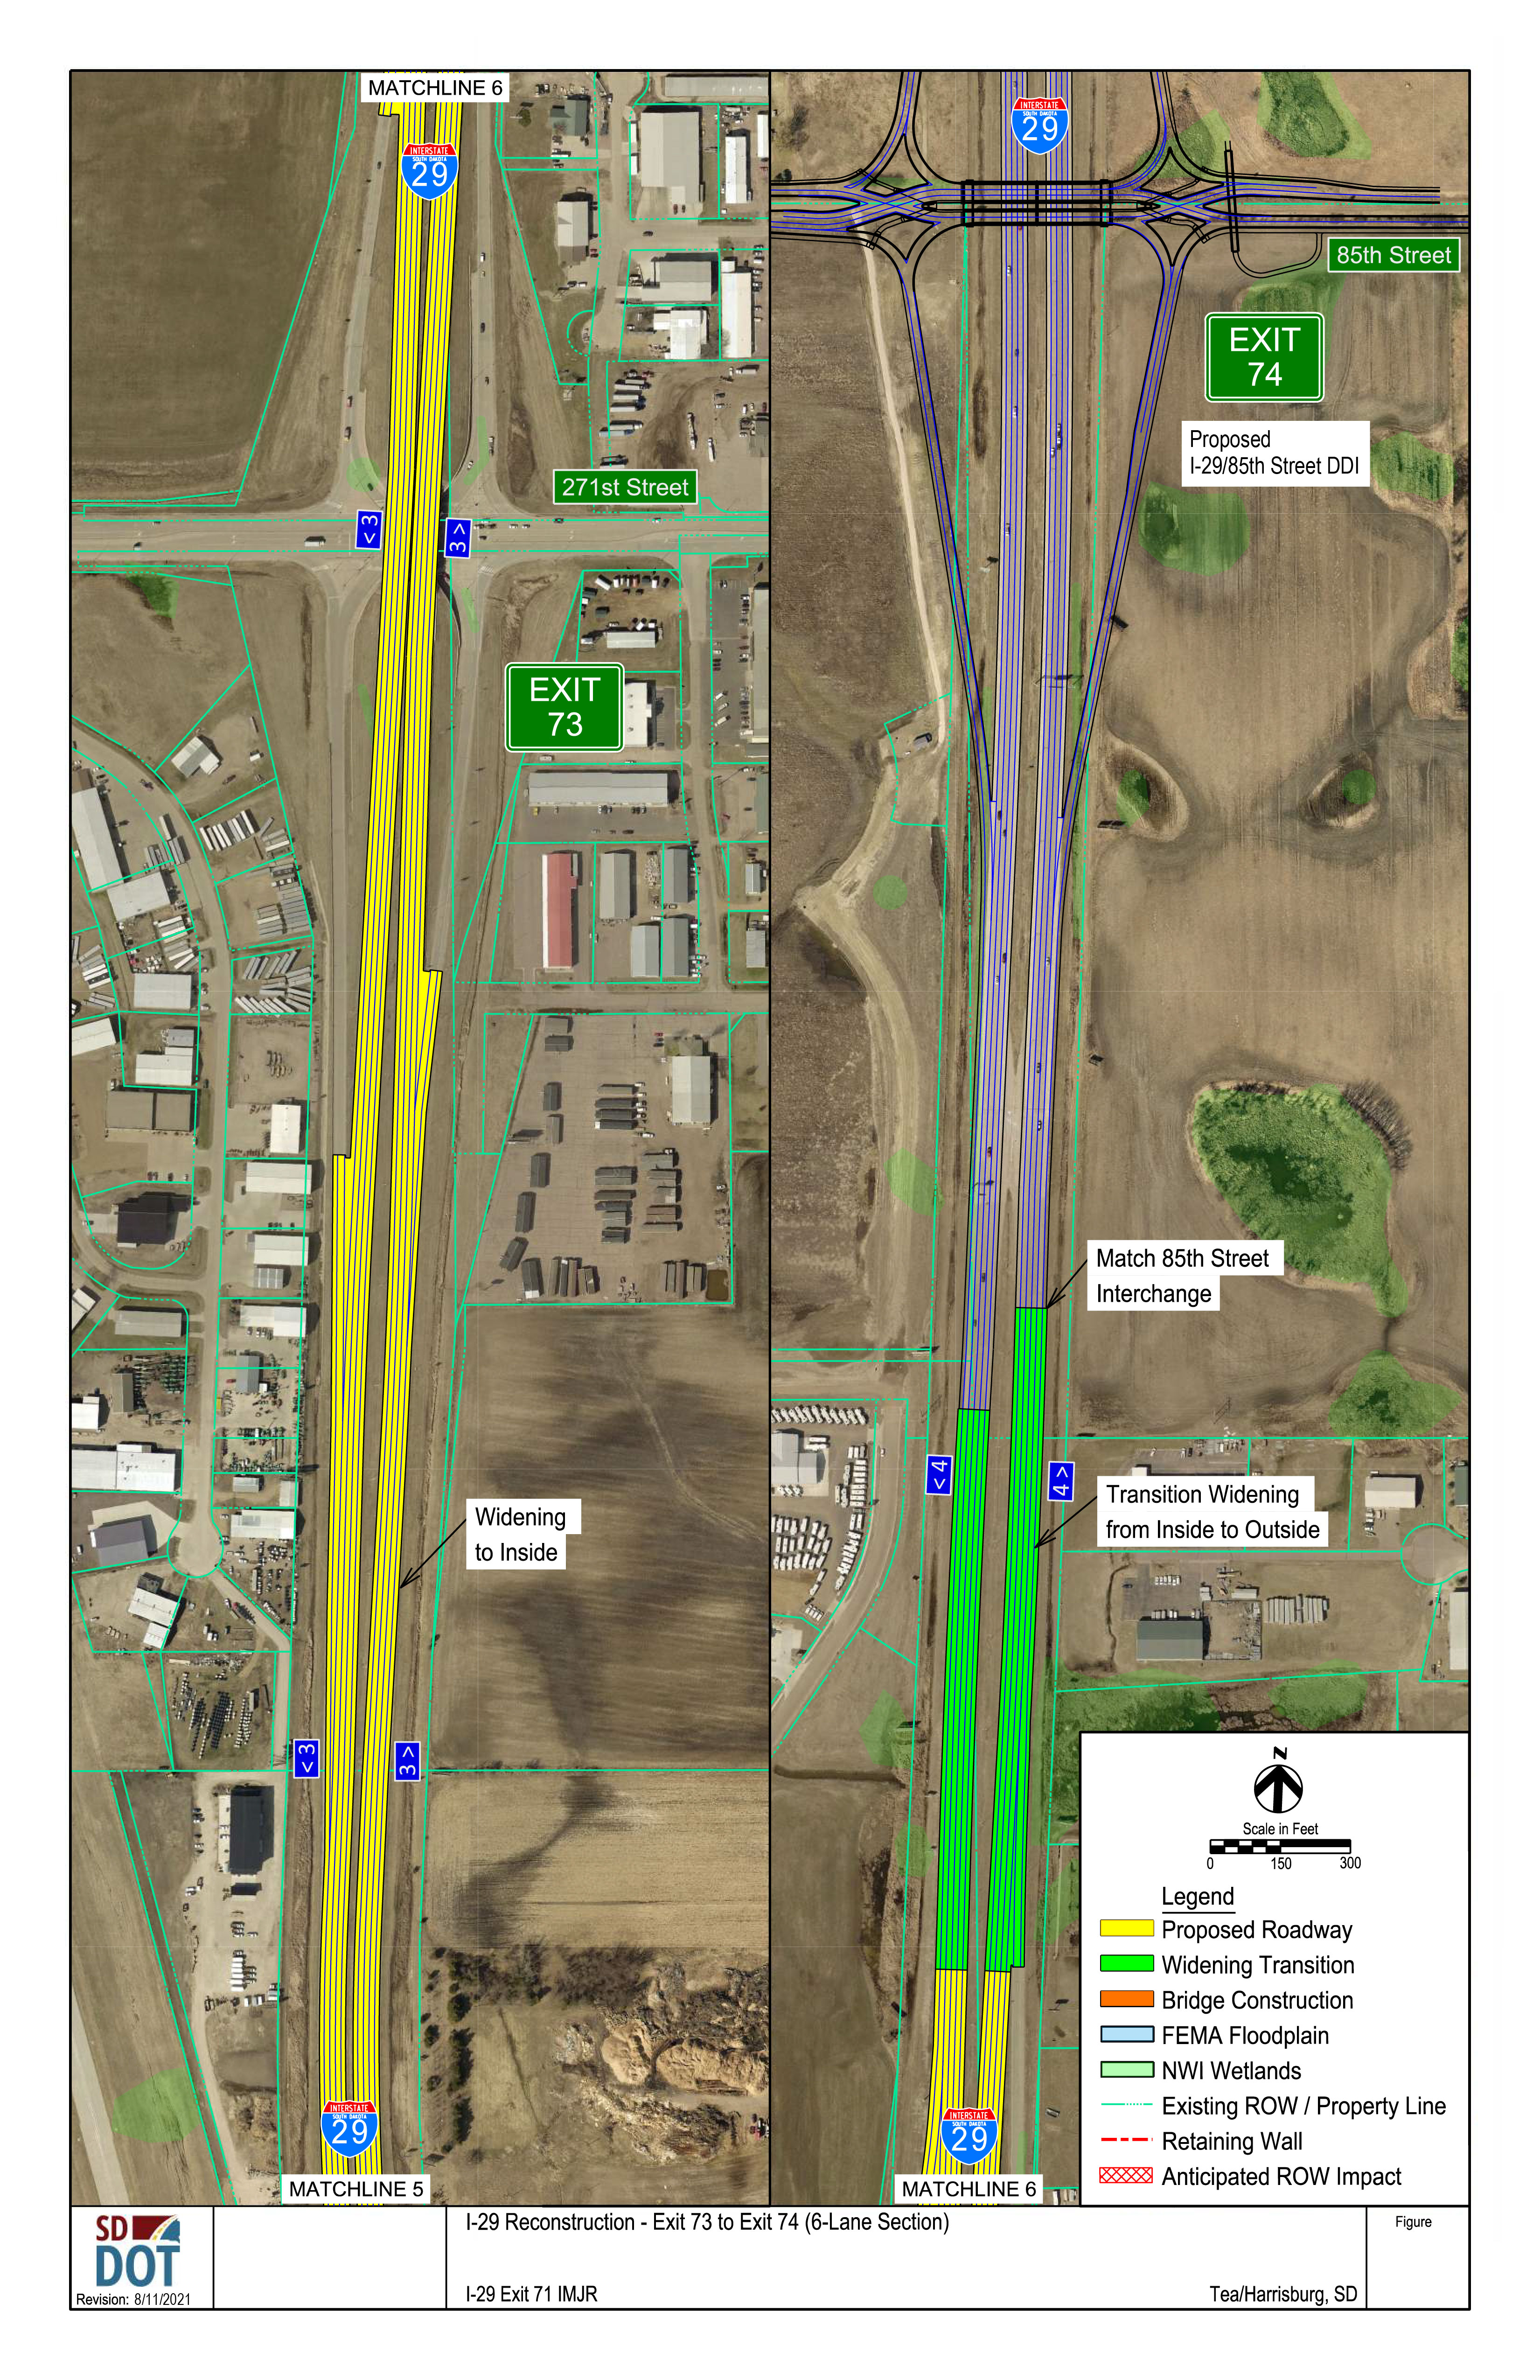 This image shows the conceptual layout of a 6-lane construction from exits 73 to 74. Details on the diagram include the proposed roadway, the widening transition, bridge construction, FEMA floodplain, NWI Wetlands, existing right of way and property lines, retaining walls and anticipated right of way impacts.